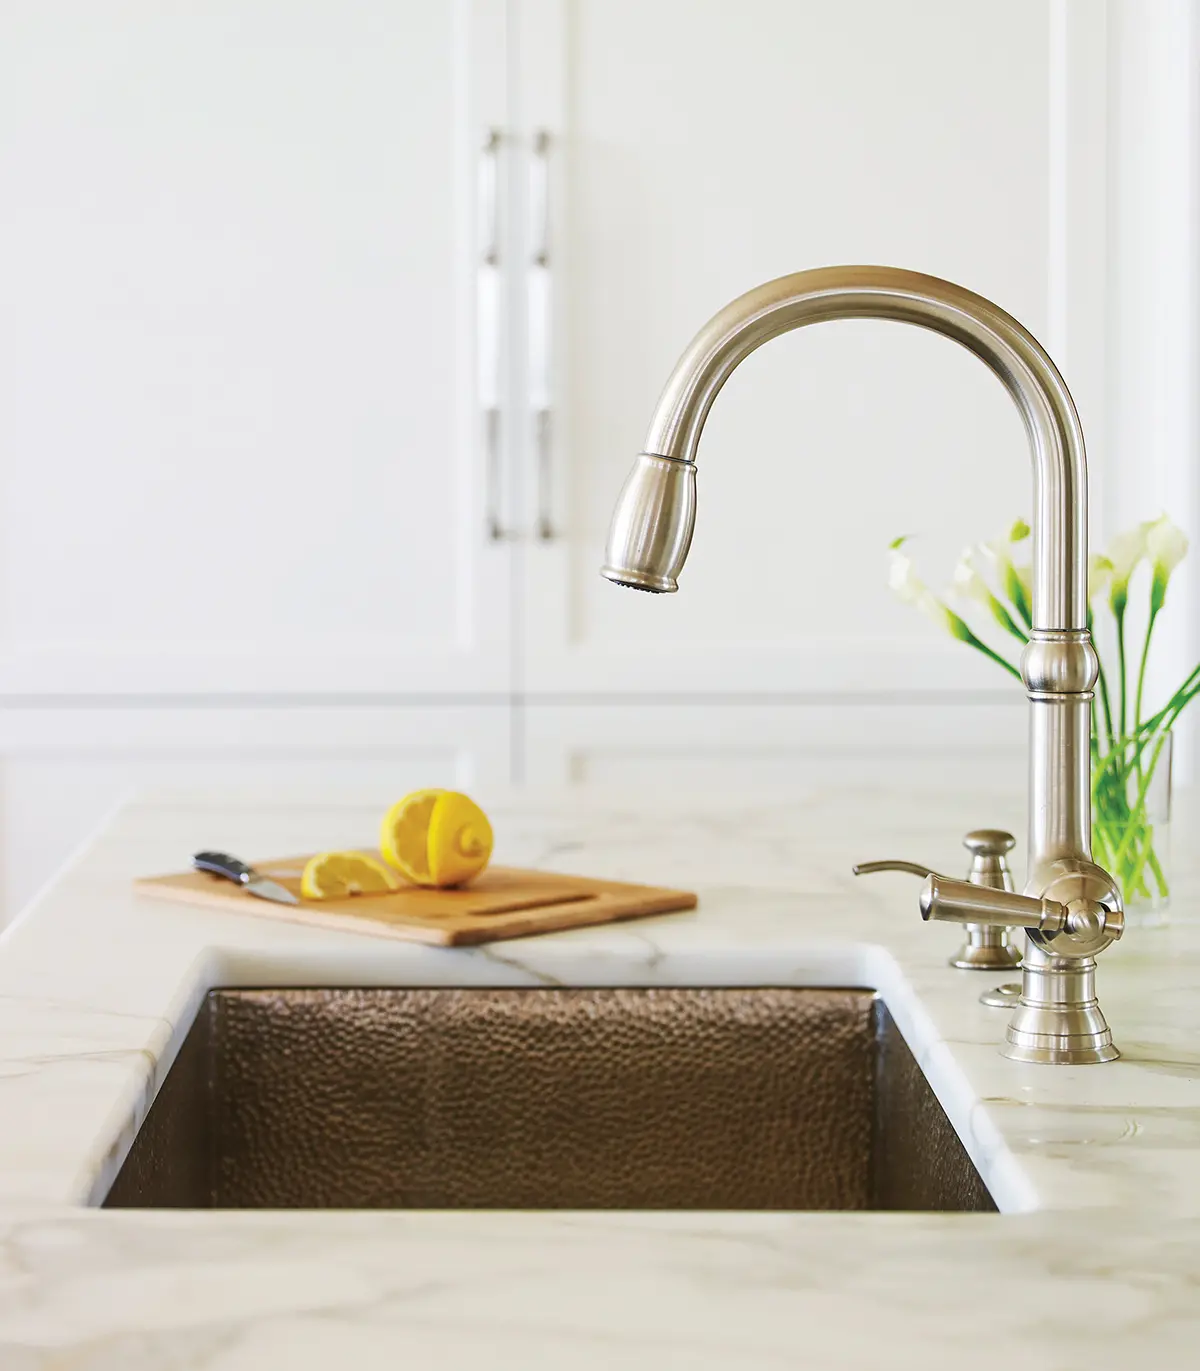 A modern, sleek silver faucet with hammer finish basin and marble countertops in the kitchen at Whales Watch